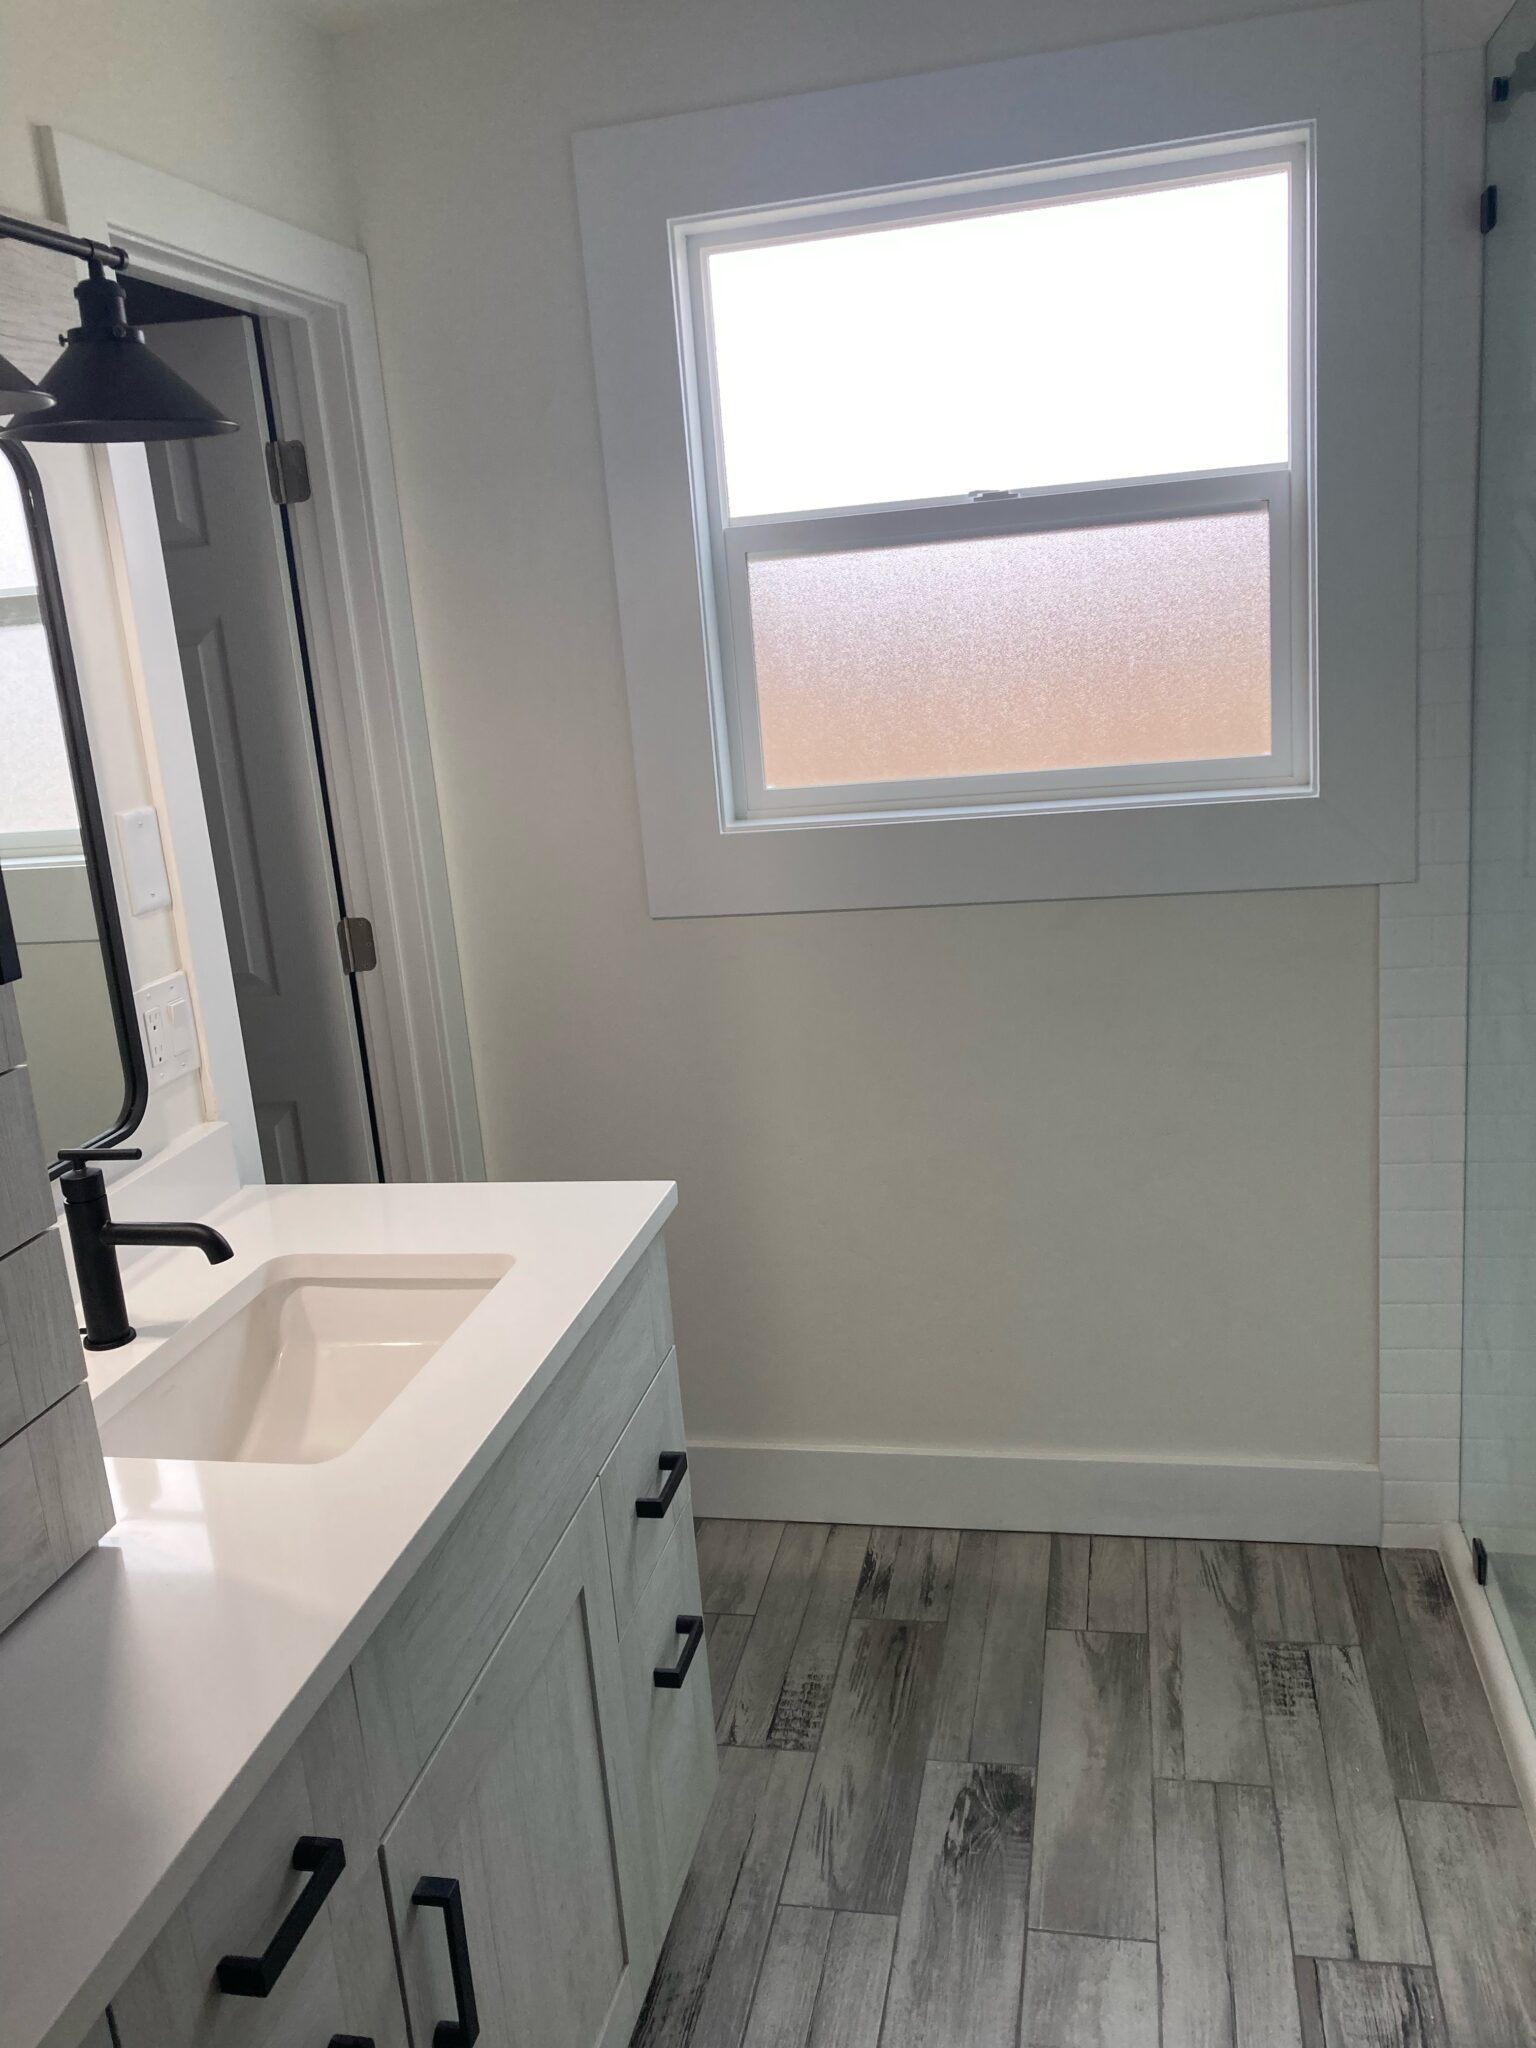 View of bathroom after remodeling